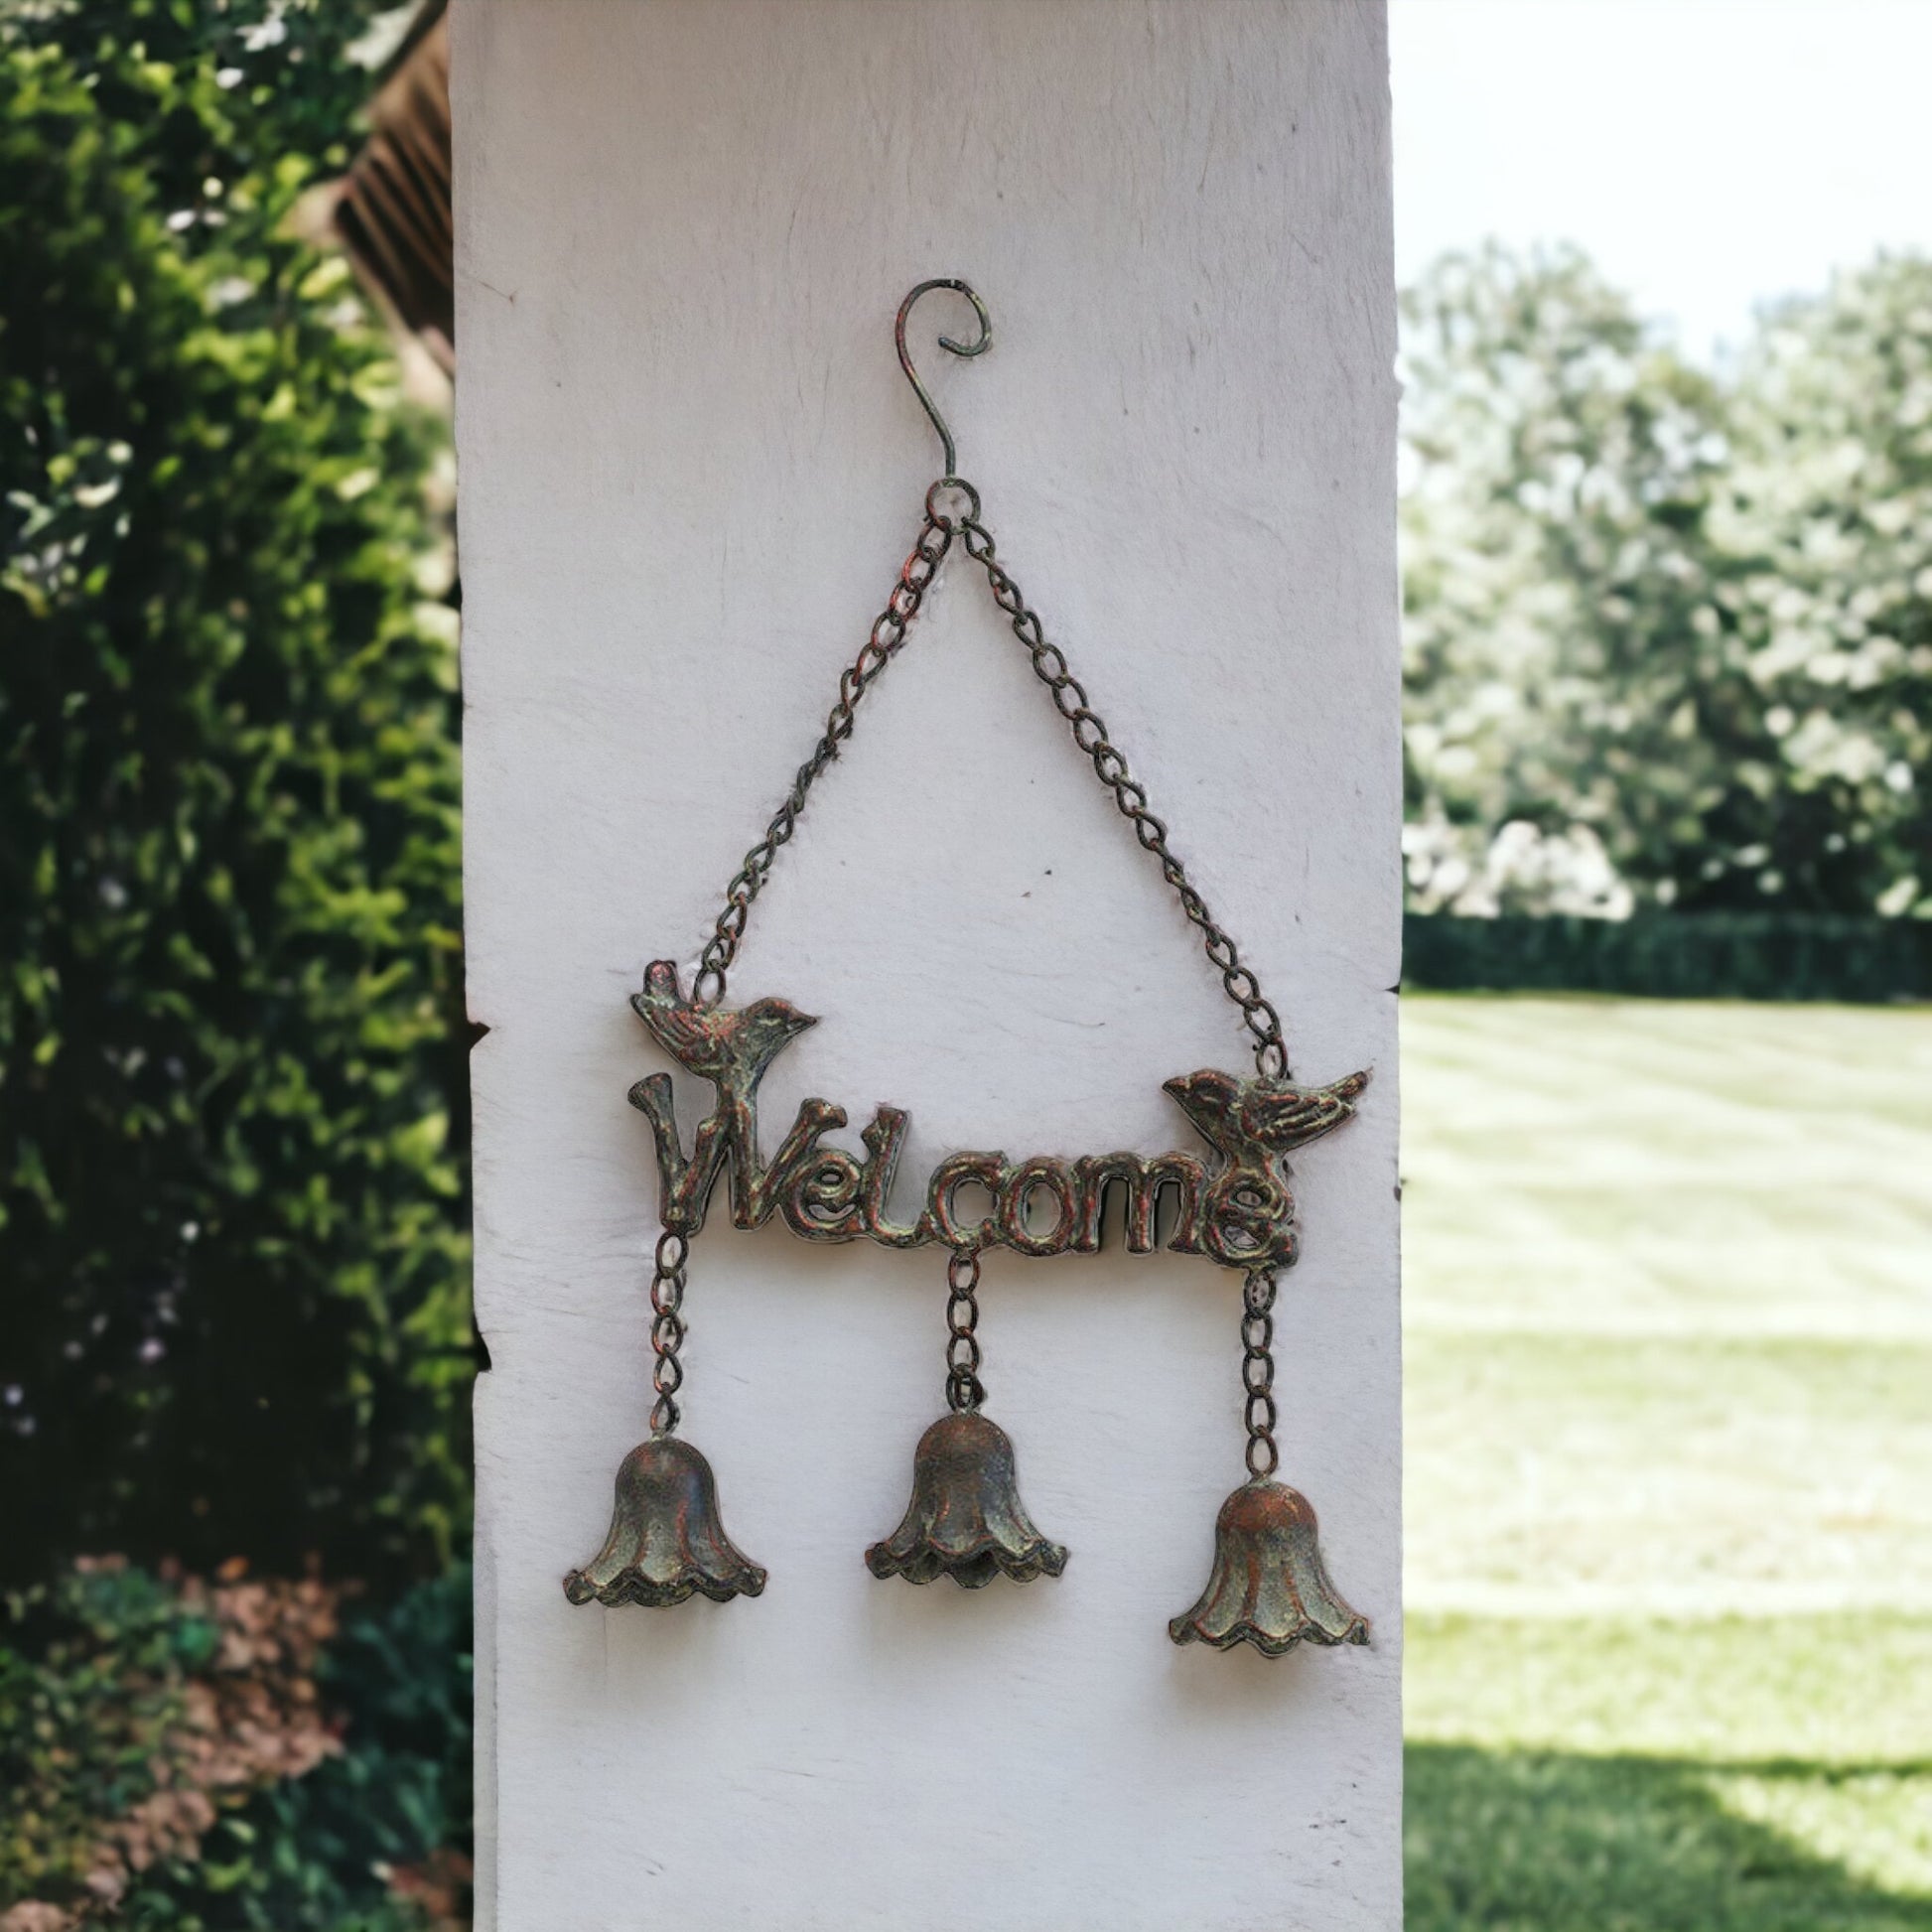 Chime Bell Welcome Birds Rustic Garden - The Renmy Store Homewares & Gifts 